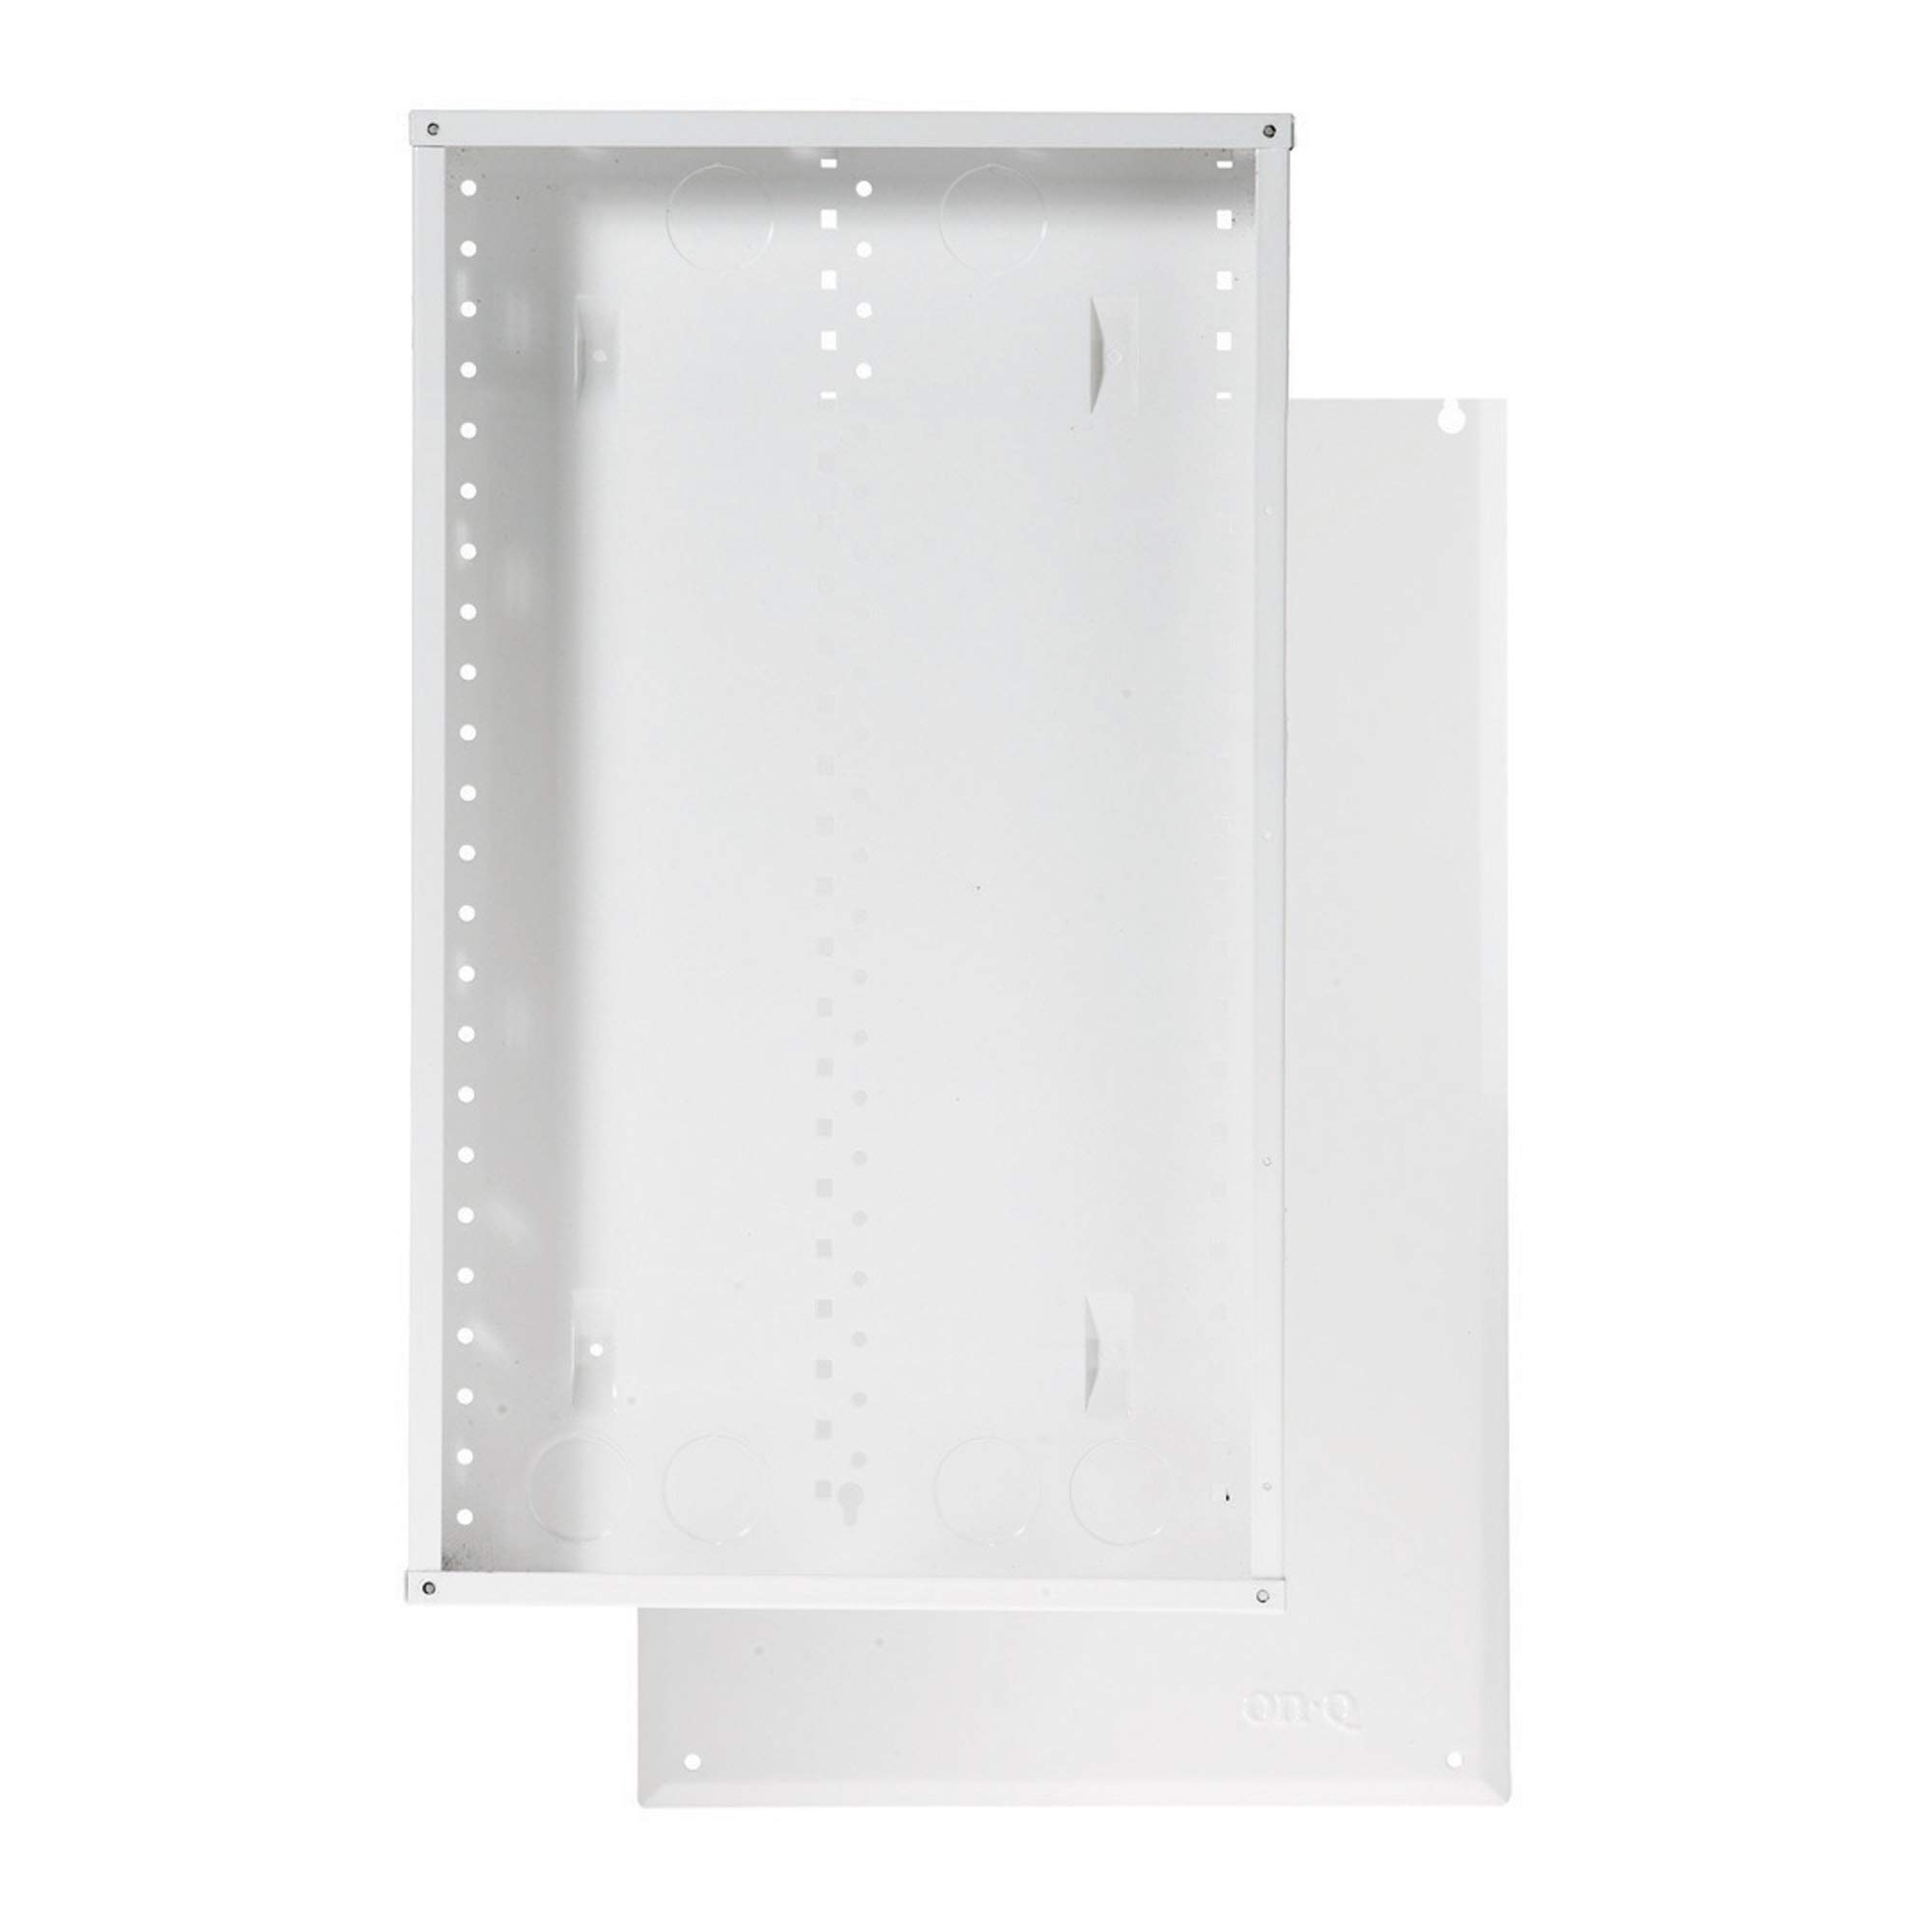 Legrand - OnQ 28 Inch Media Enclosure, 20 Gauge Structured Media Box, Cable Wall Cover with 2.5 Inch Openings to Pull Wires Through, Recessed Media Box Includes Cover Mounting Hardware, White, EN2800